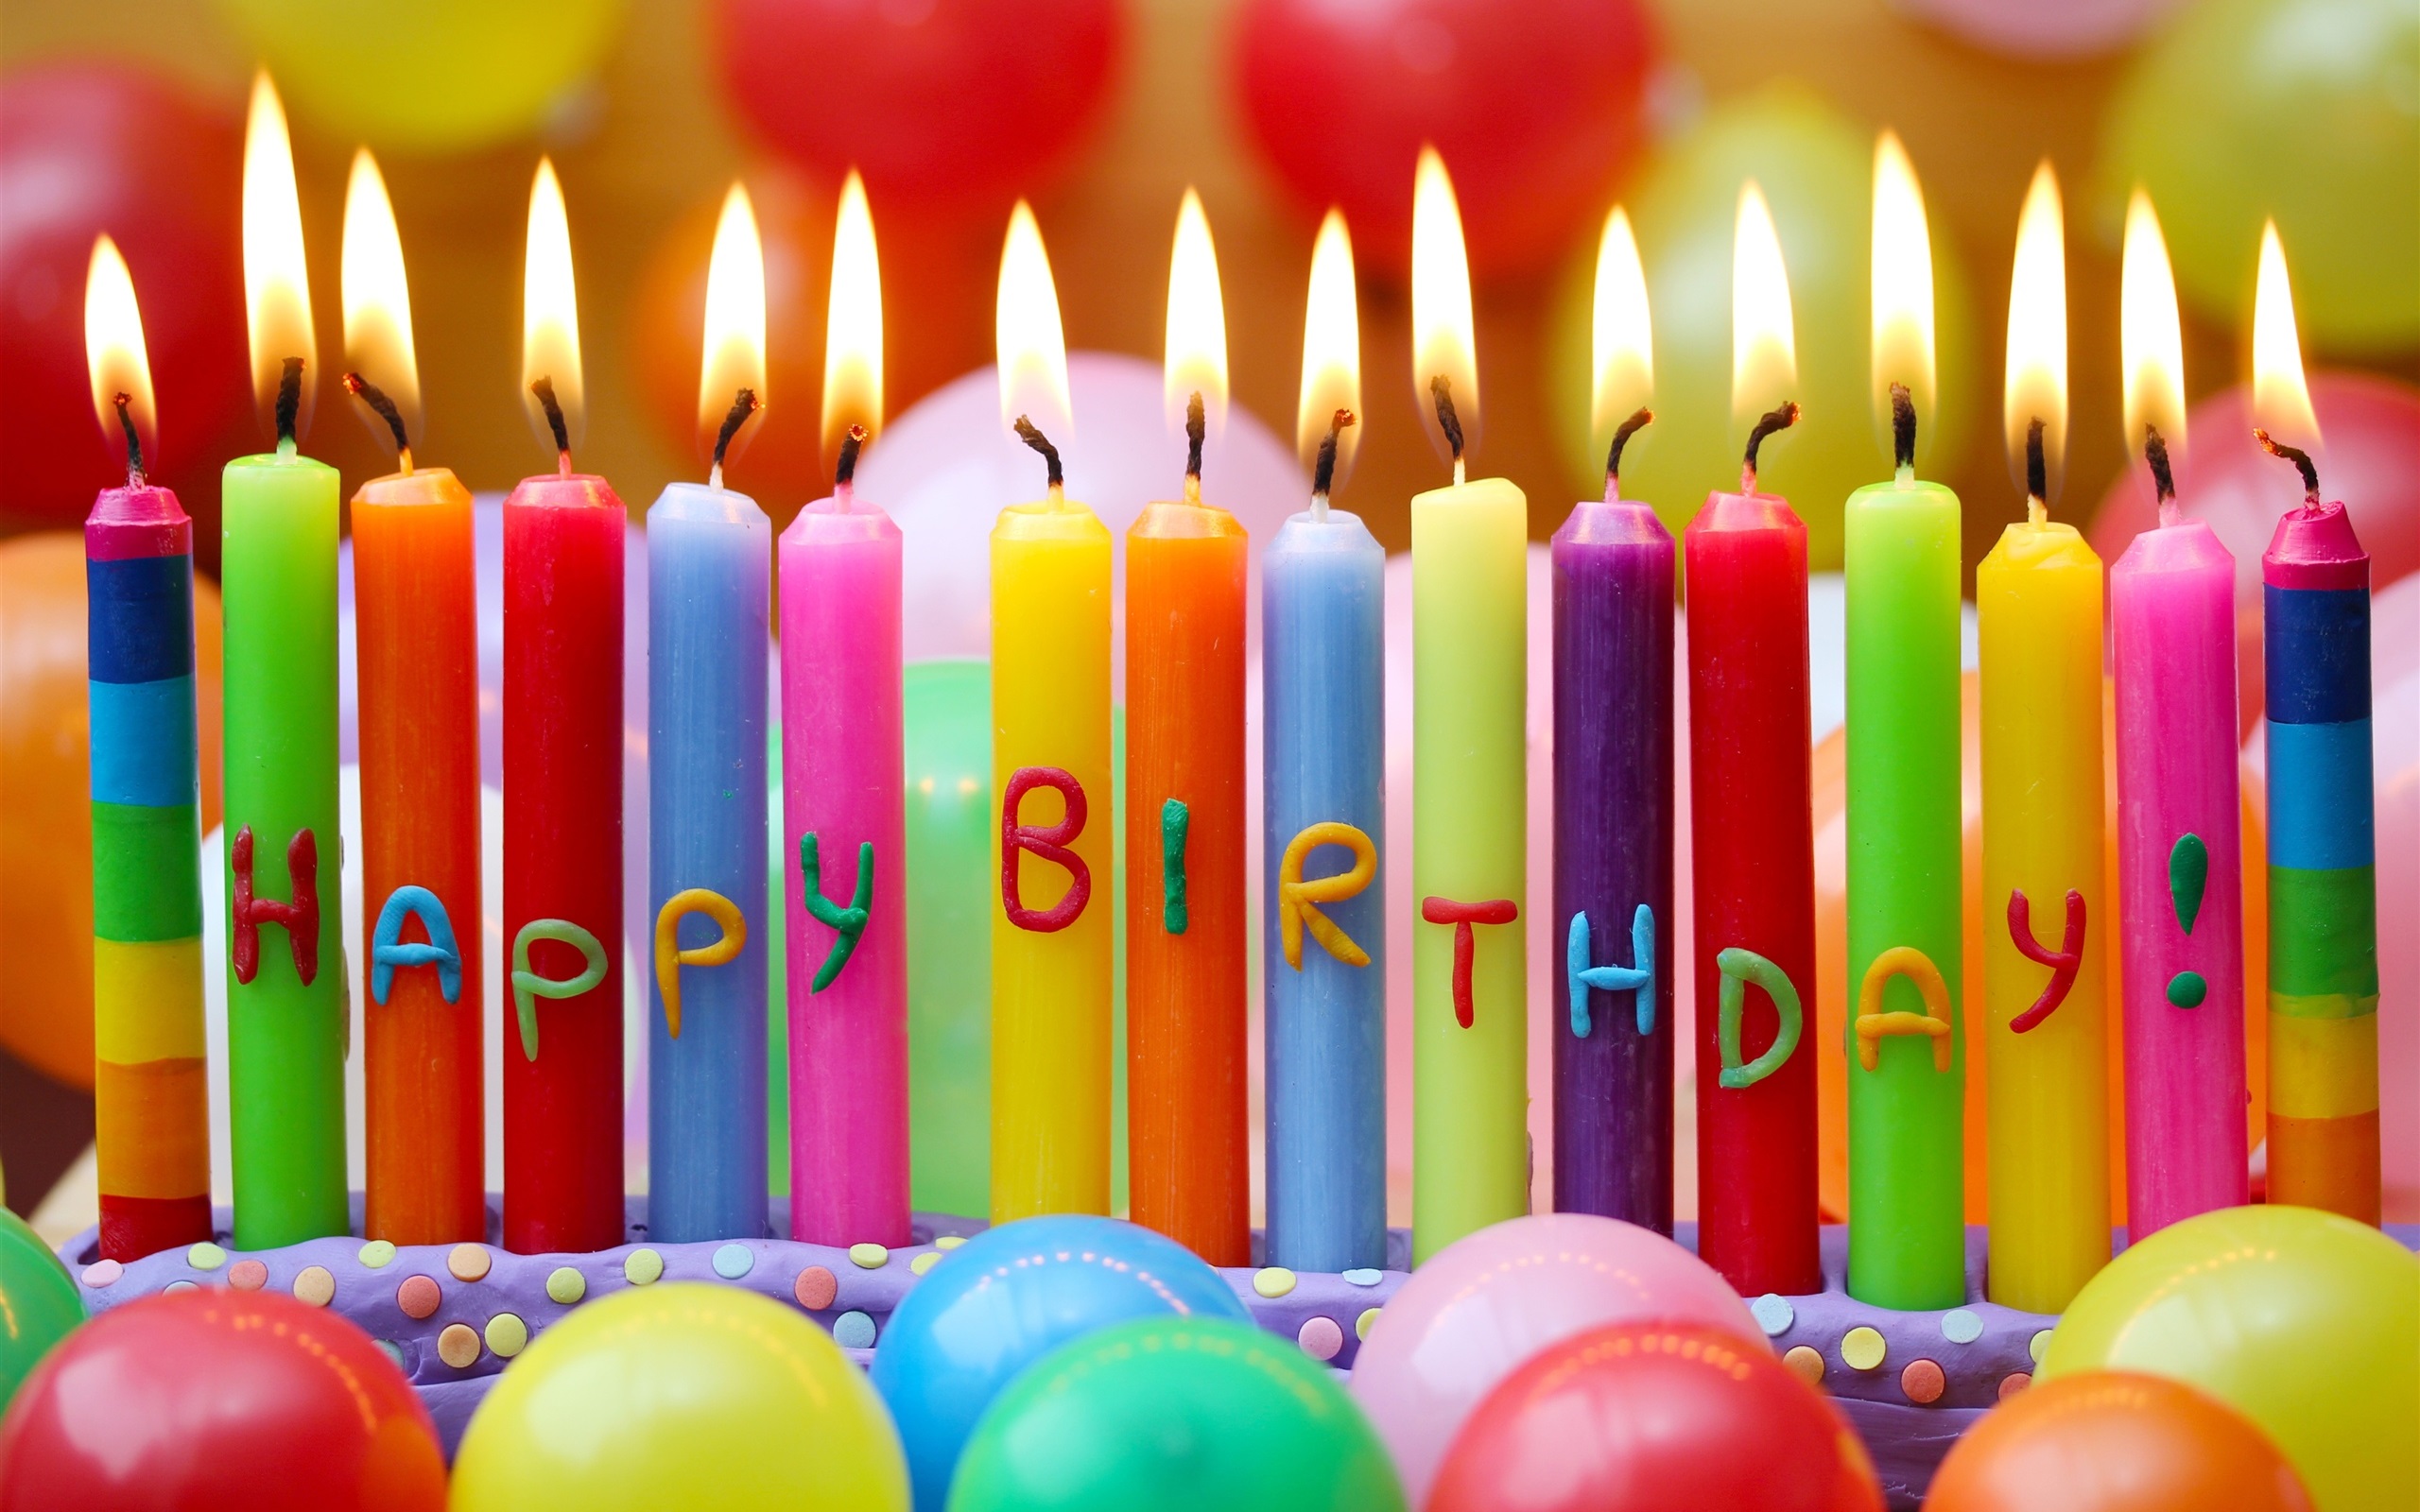 Happy-Birthday-image-colorful-candles-balloons